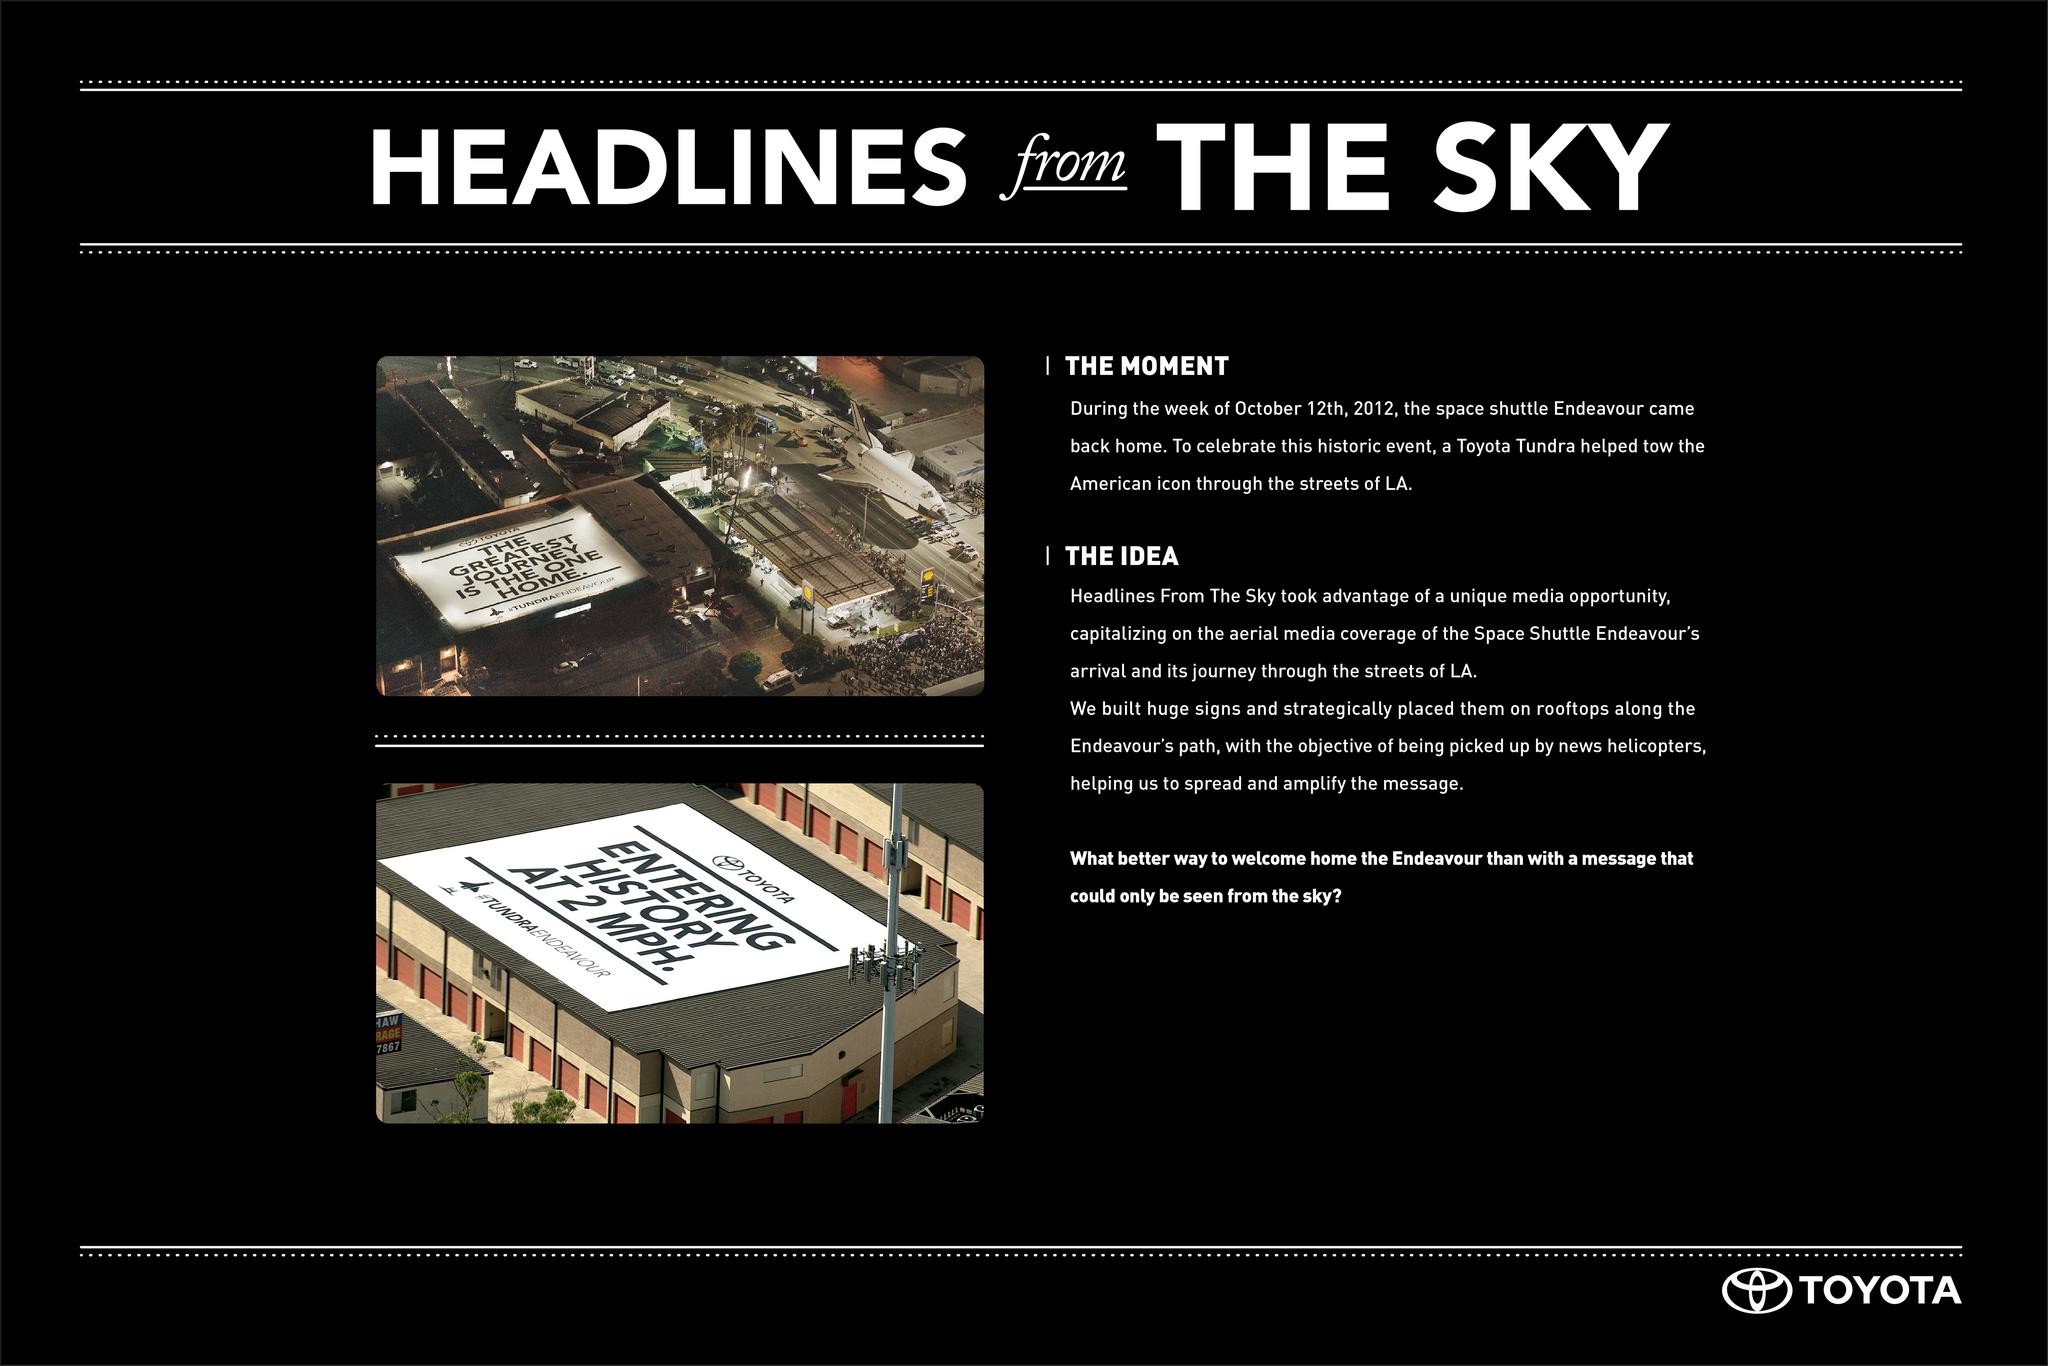 HEADLINES FROM THE SKY